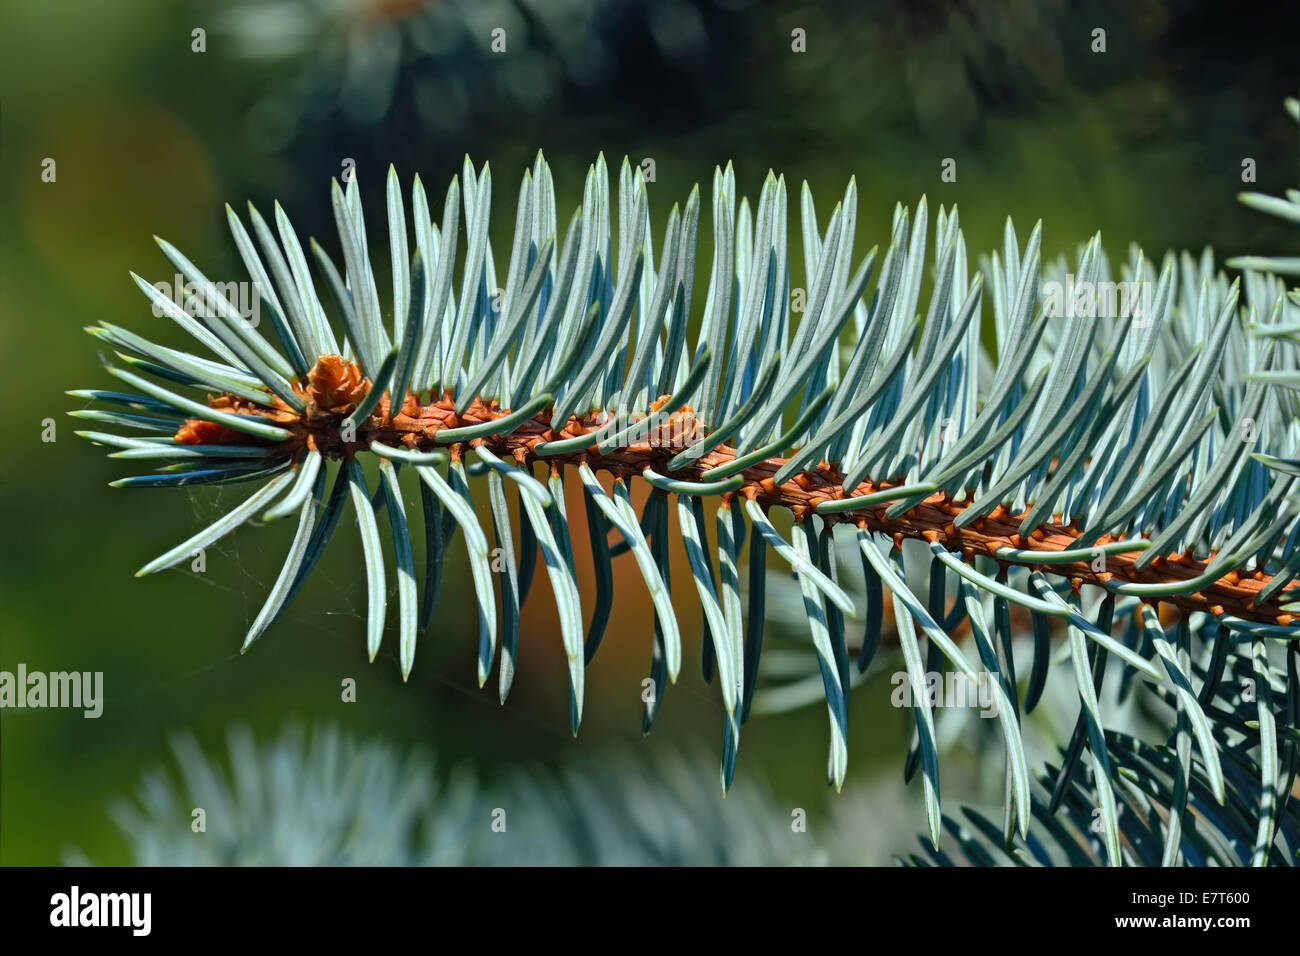 Needles of blue spruce (Picea pungens) close up Stock Photo